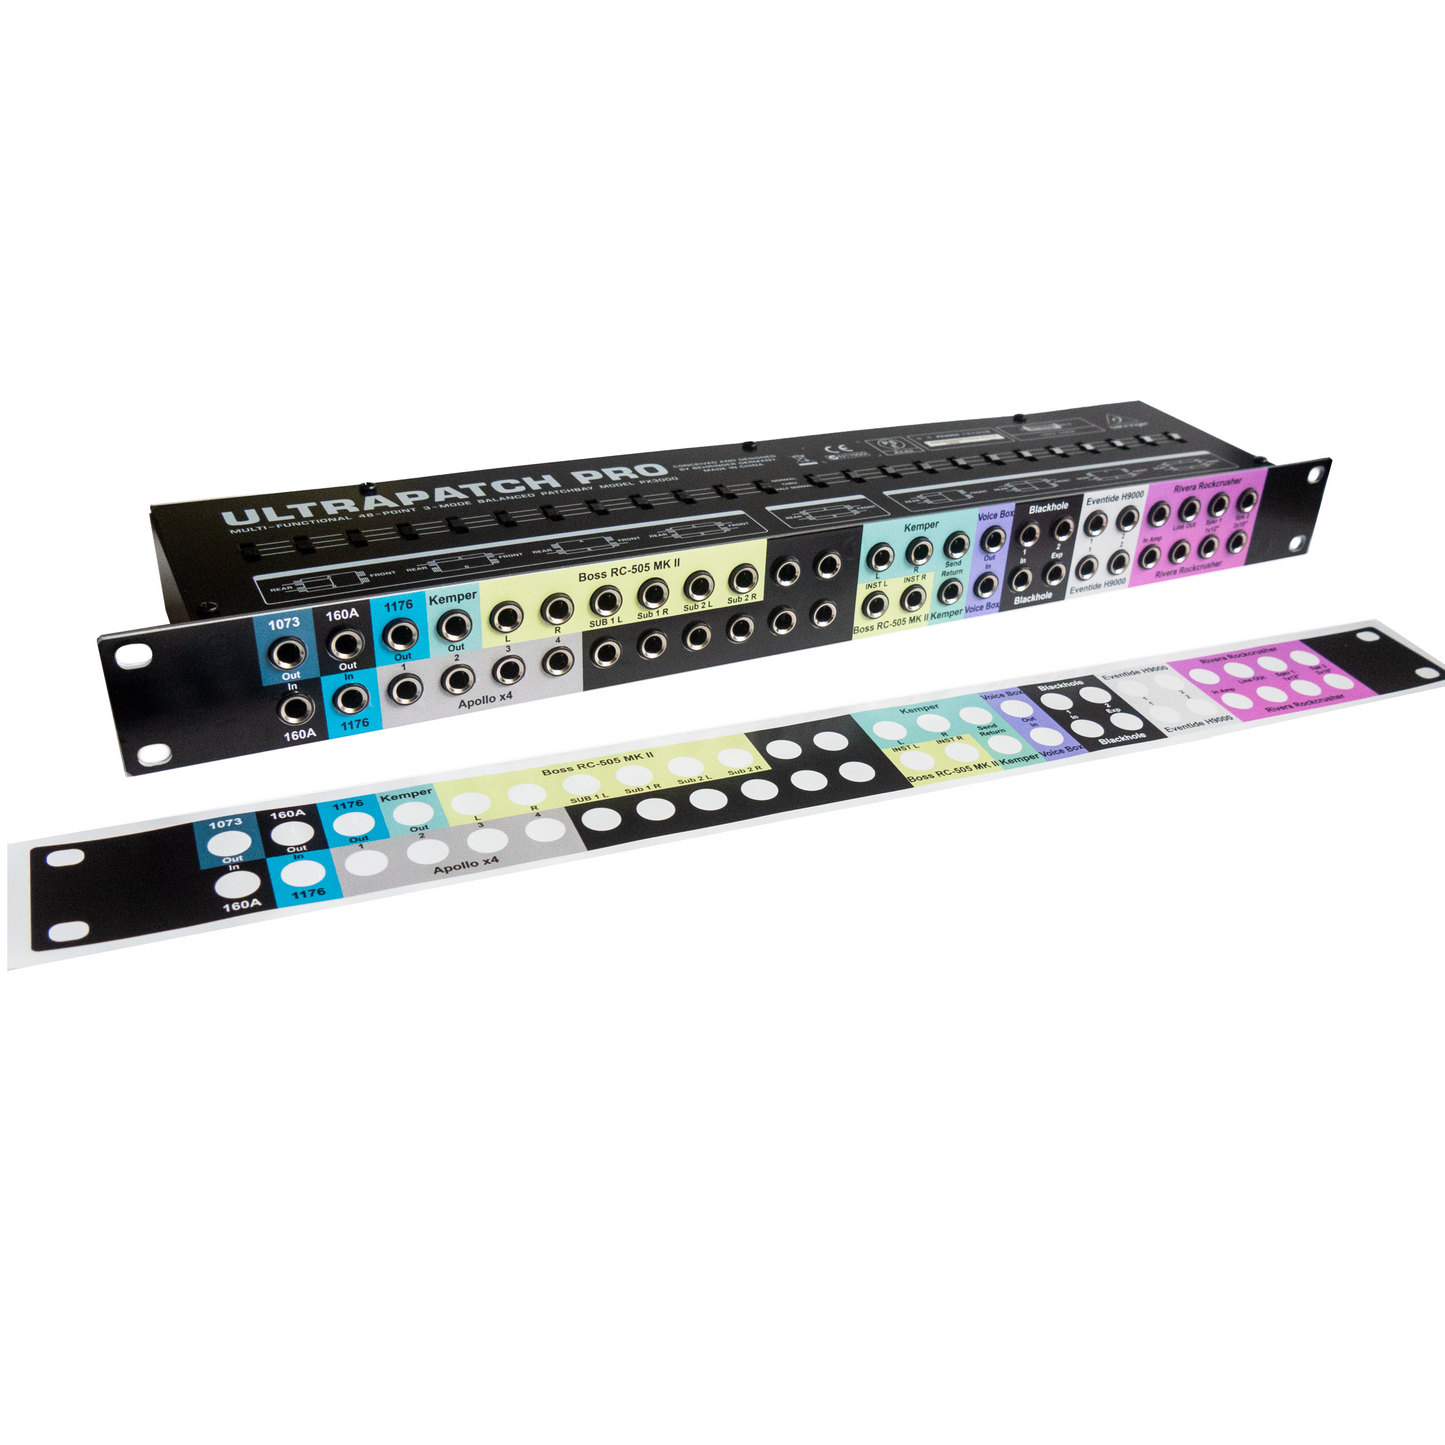 Behringer Ultrapatch Pro PX3000 Patchbay Label